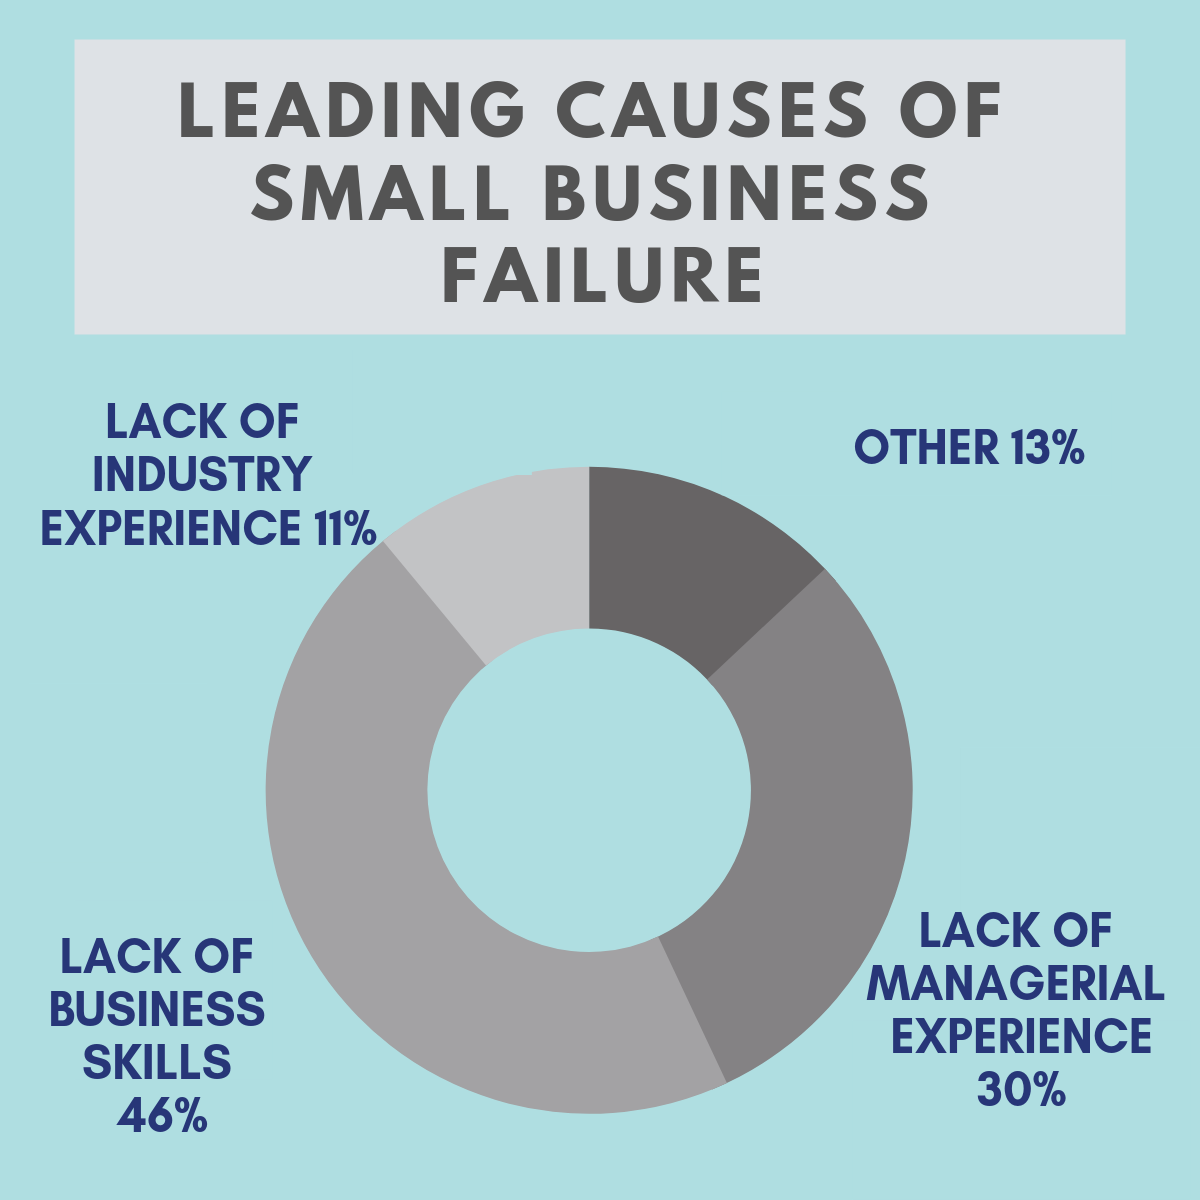 Leading causes of small business failure. Lack of business skills: 46%, lack of managerial experience: 30%, lack of industry experience: 11%, Other: 13%